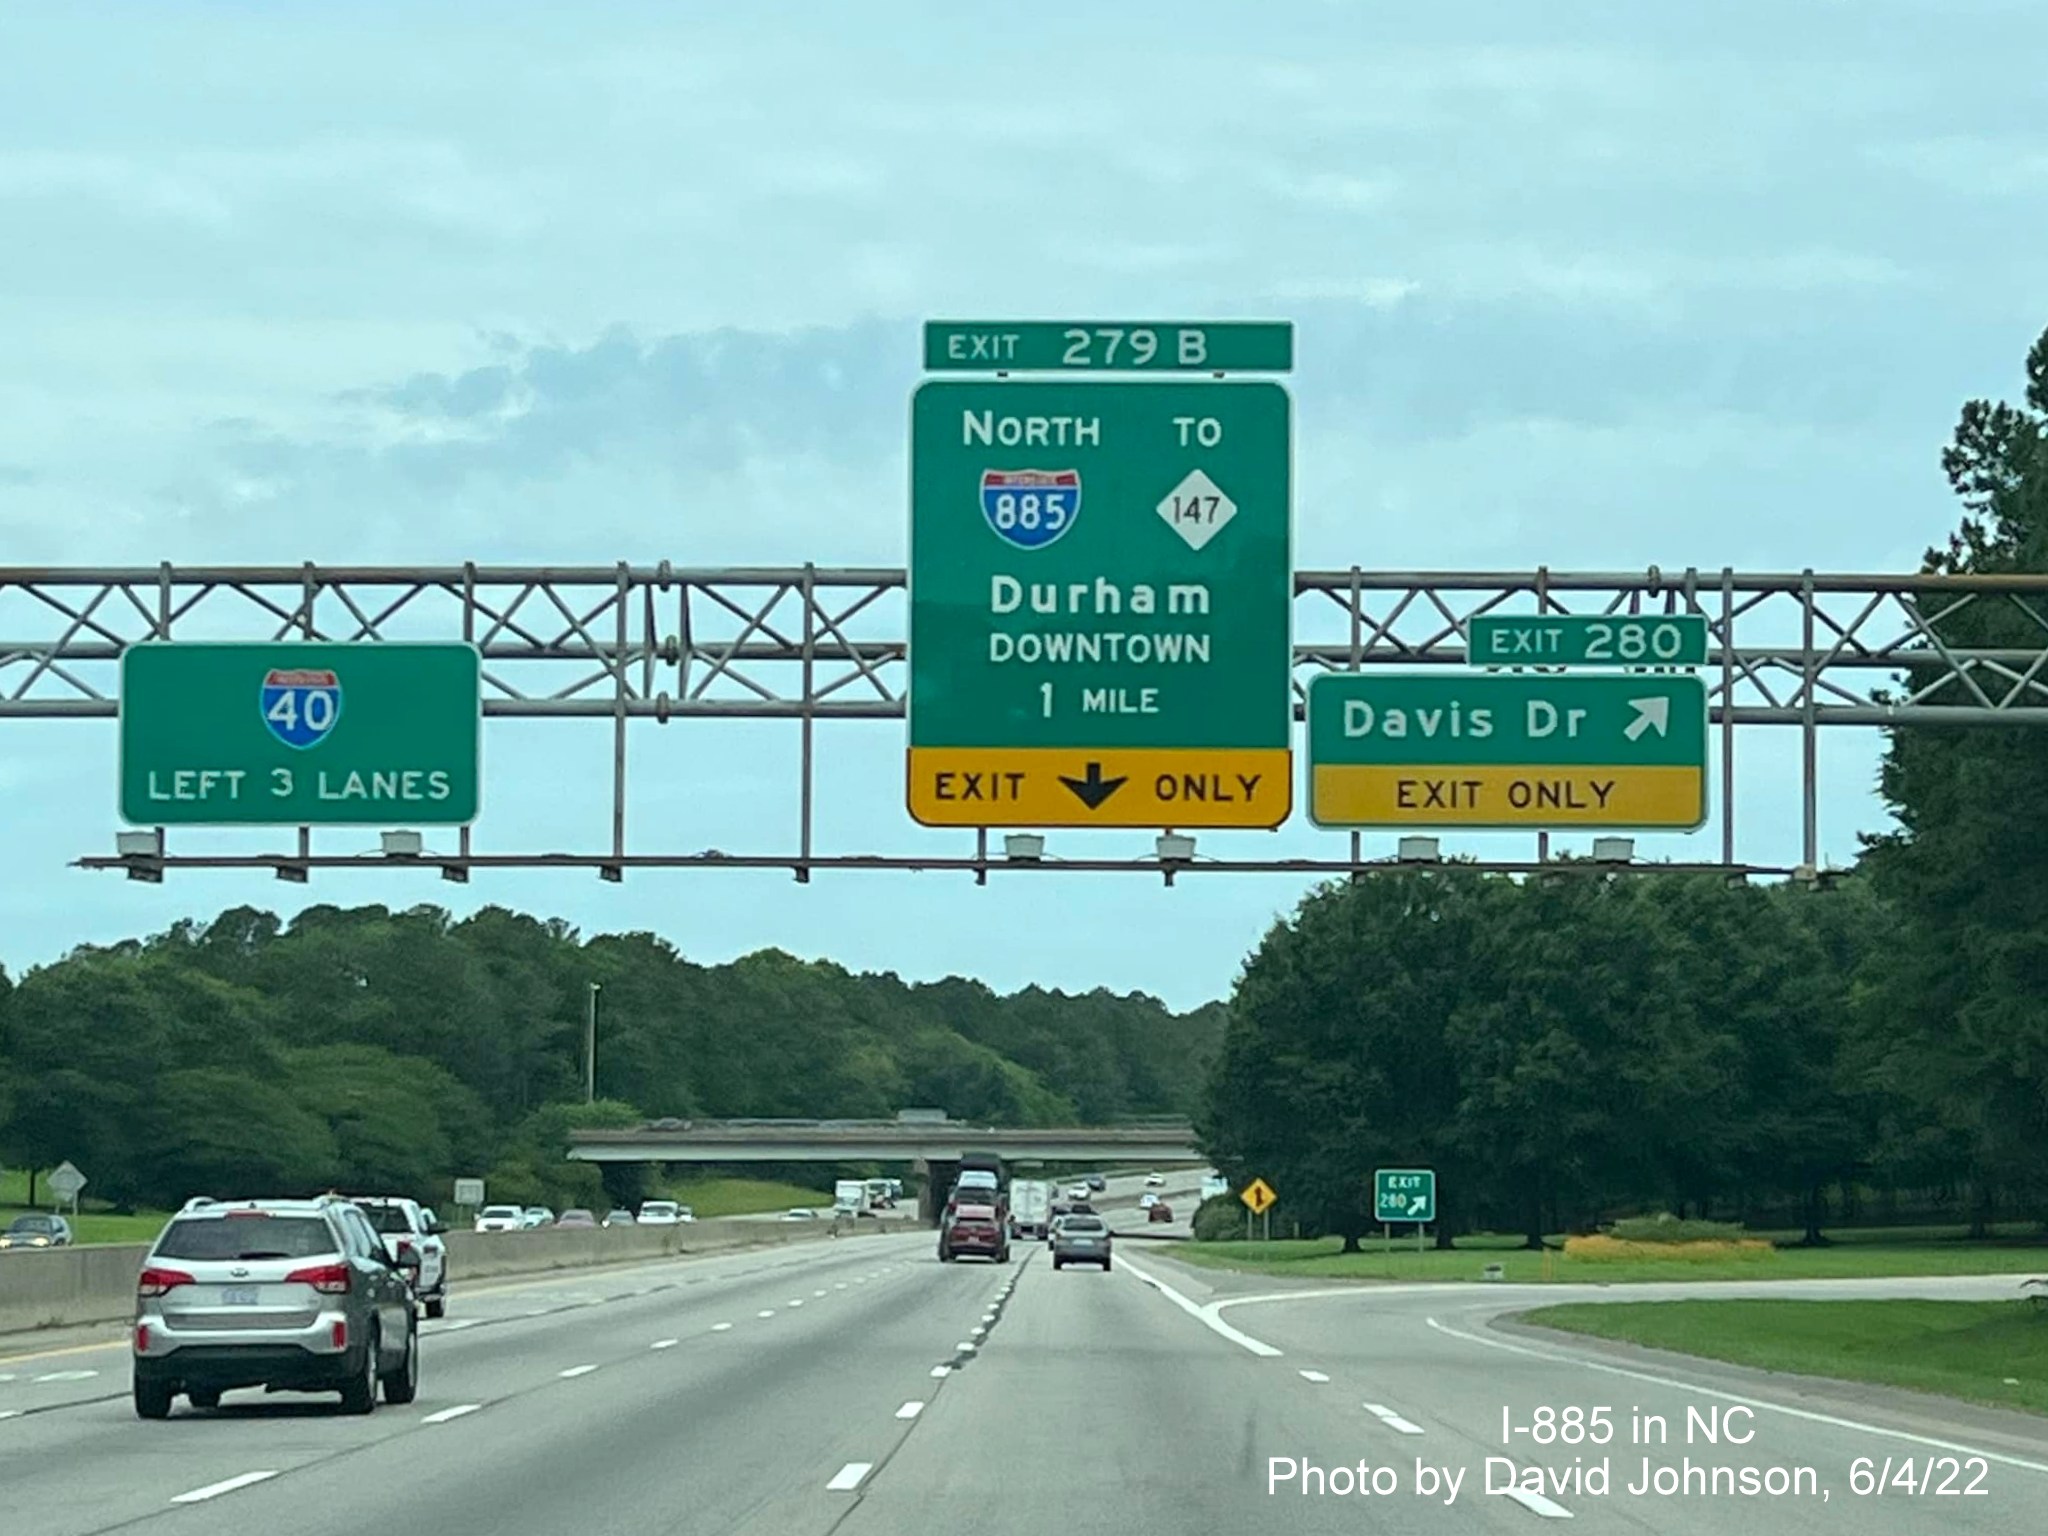 Image of new signage with I-885 shield for Durham Freeway exit on I-40 West, by David Johnson, June 2022